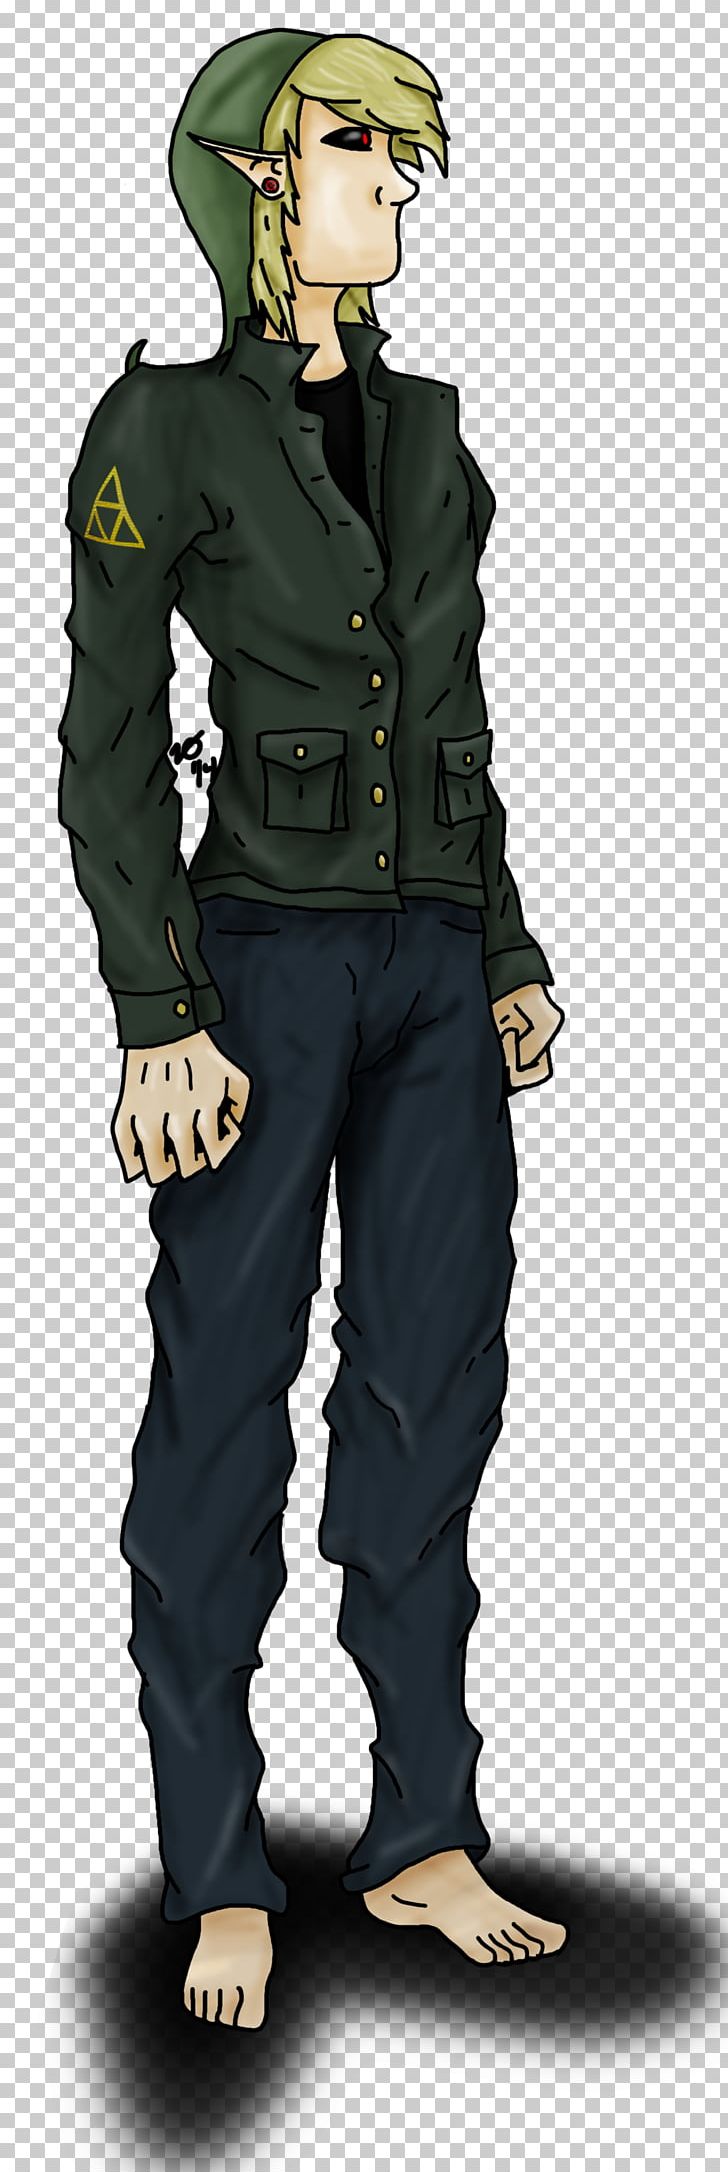 Soldier Military Uniform Creepypasta Cartoon PNG, Clipart, Army Officer, Ben Drowned, Cartoon, Character, Comics Free PNG Download